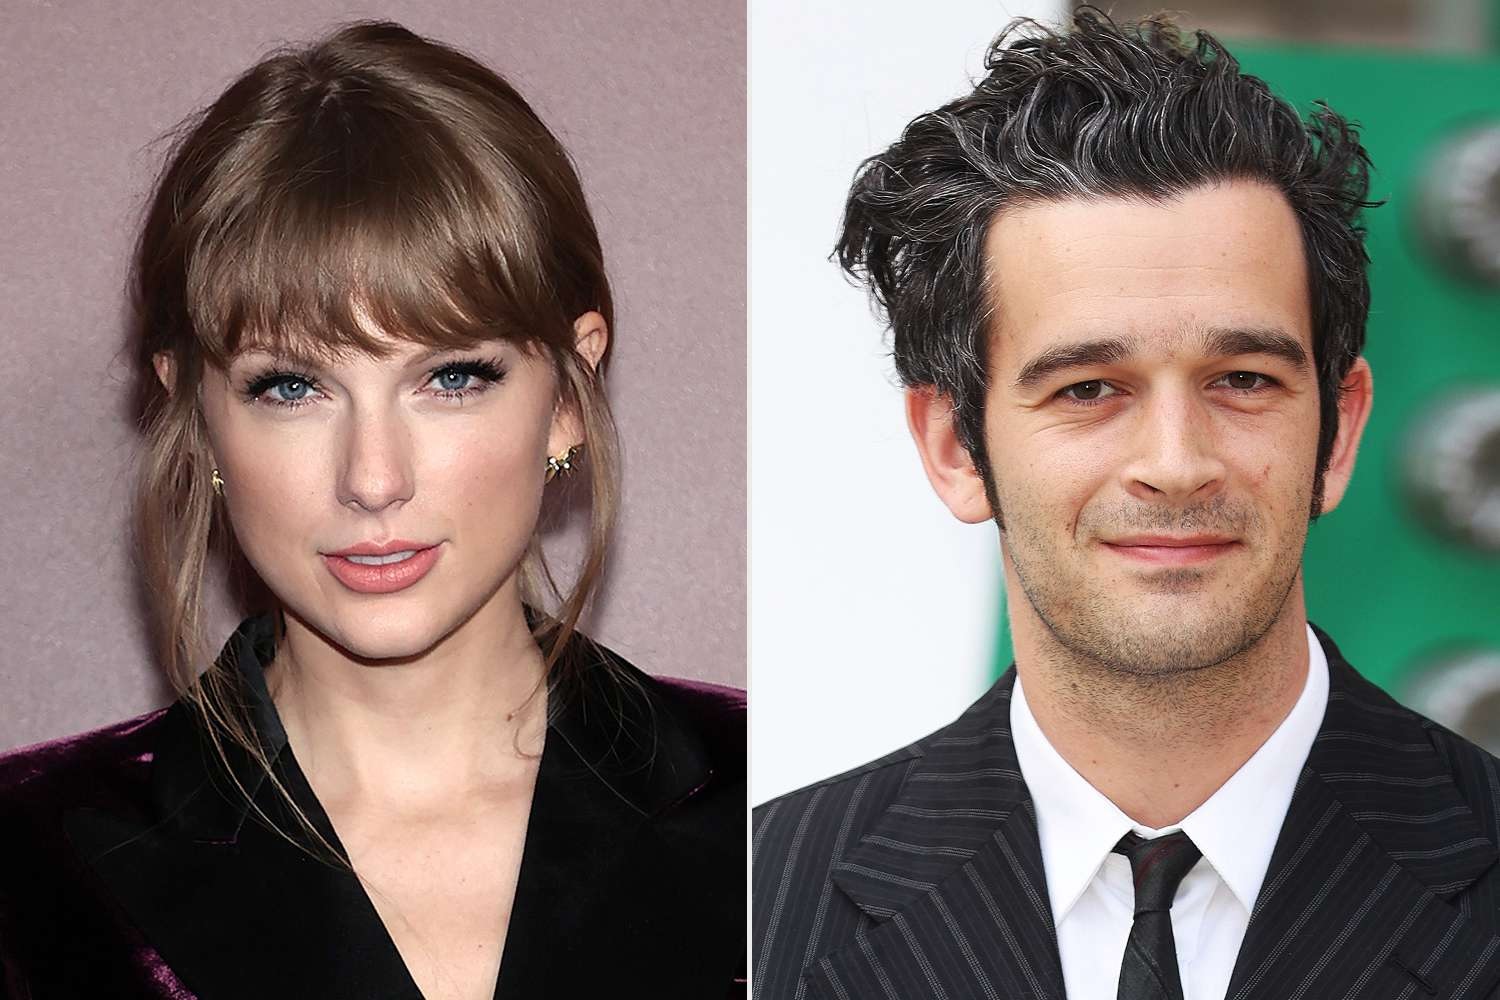 Taylor Swift and Matty Healy’s relationship status clarified after report claims pair rekindled romance